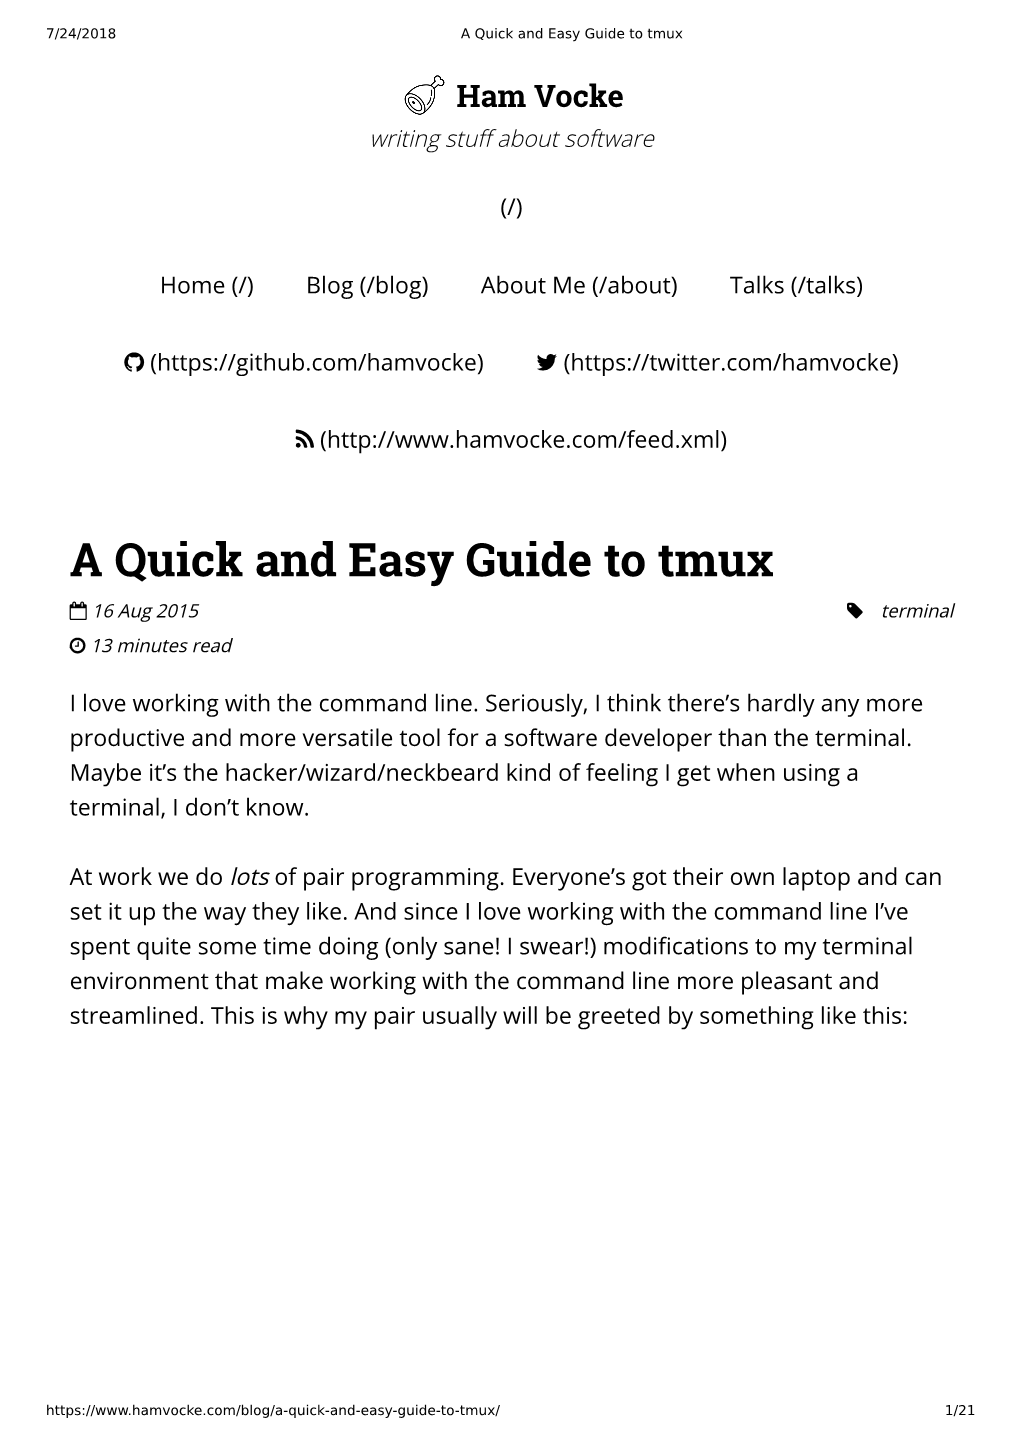 A Quick and Easy Guide to Tmux